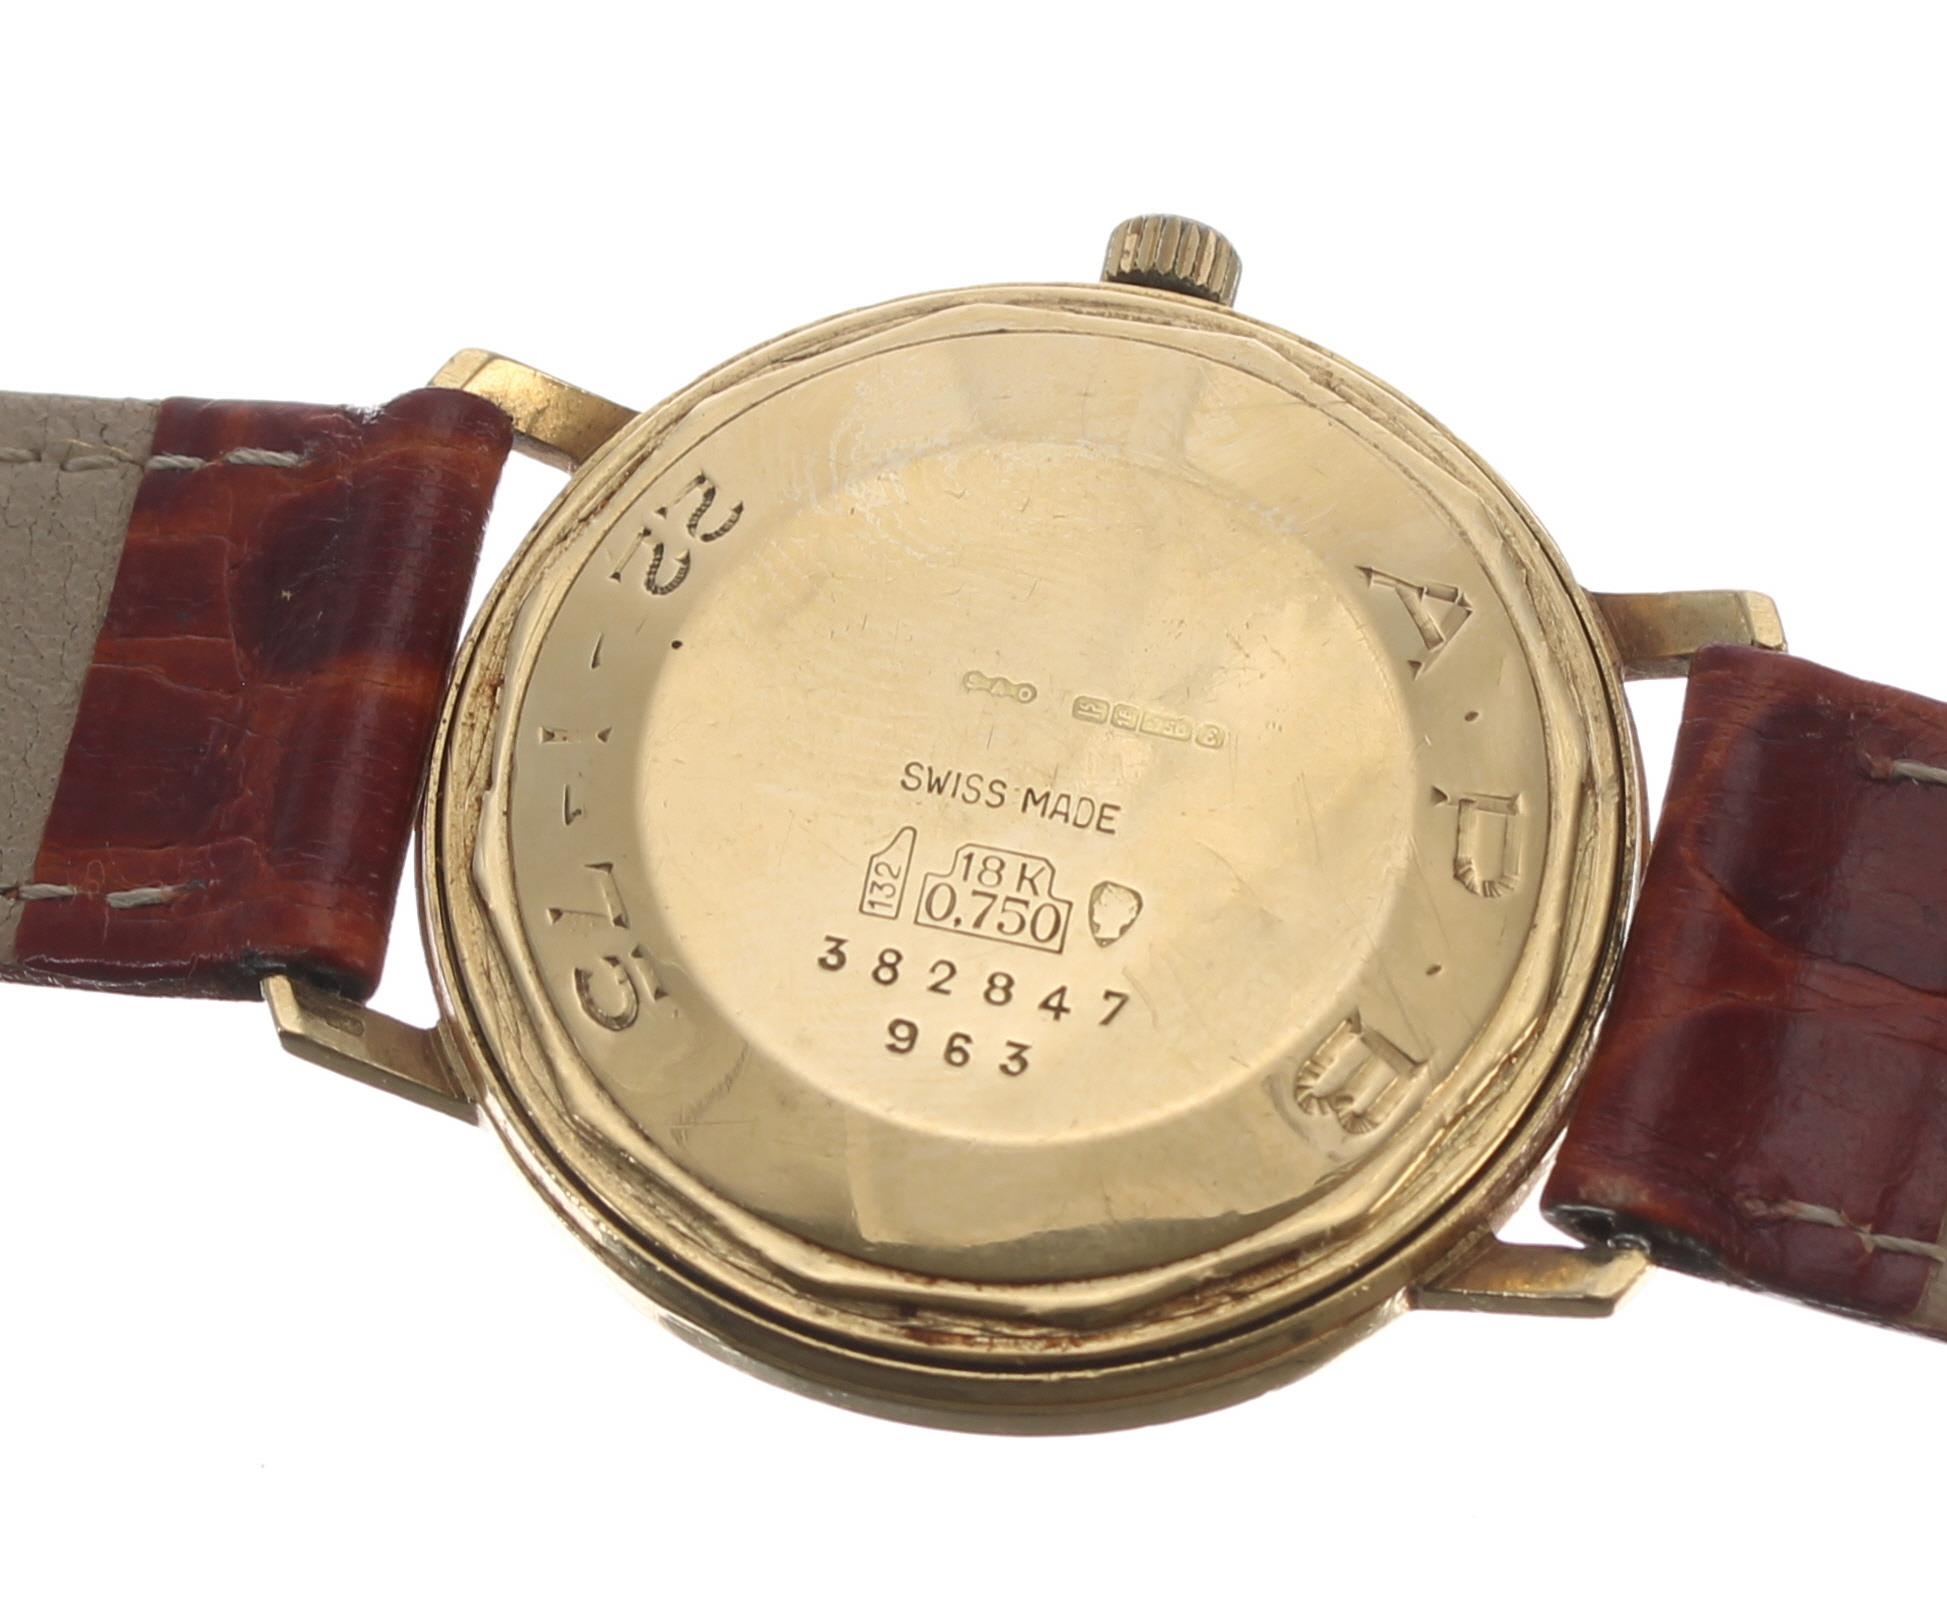 Boodle & Dunthorne 18ct automatic gentleman's wristwatch, case ref. 382847 983, import hallmarks for - Image 2 of 3